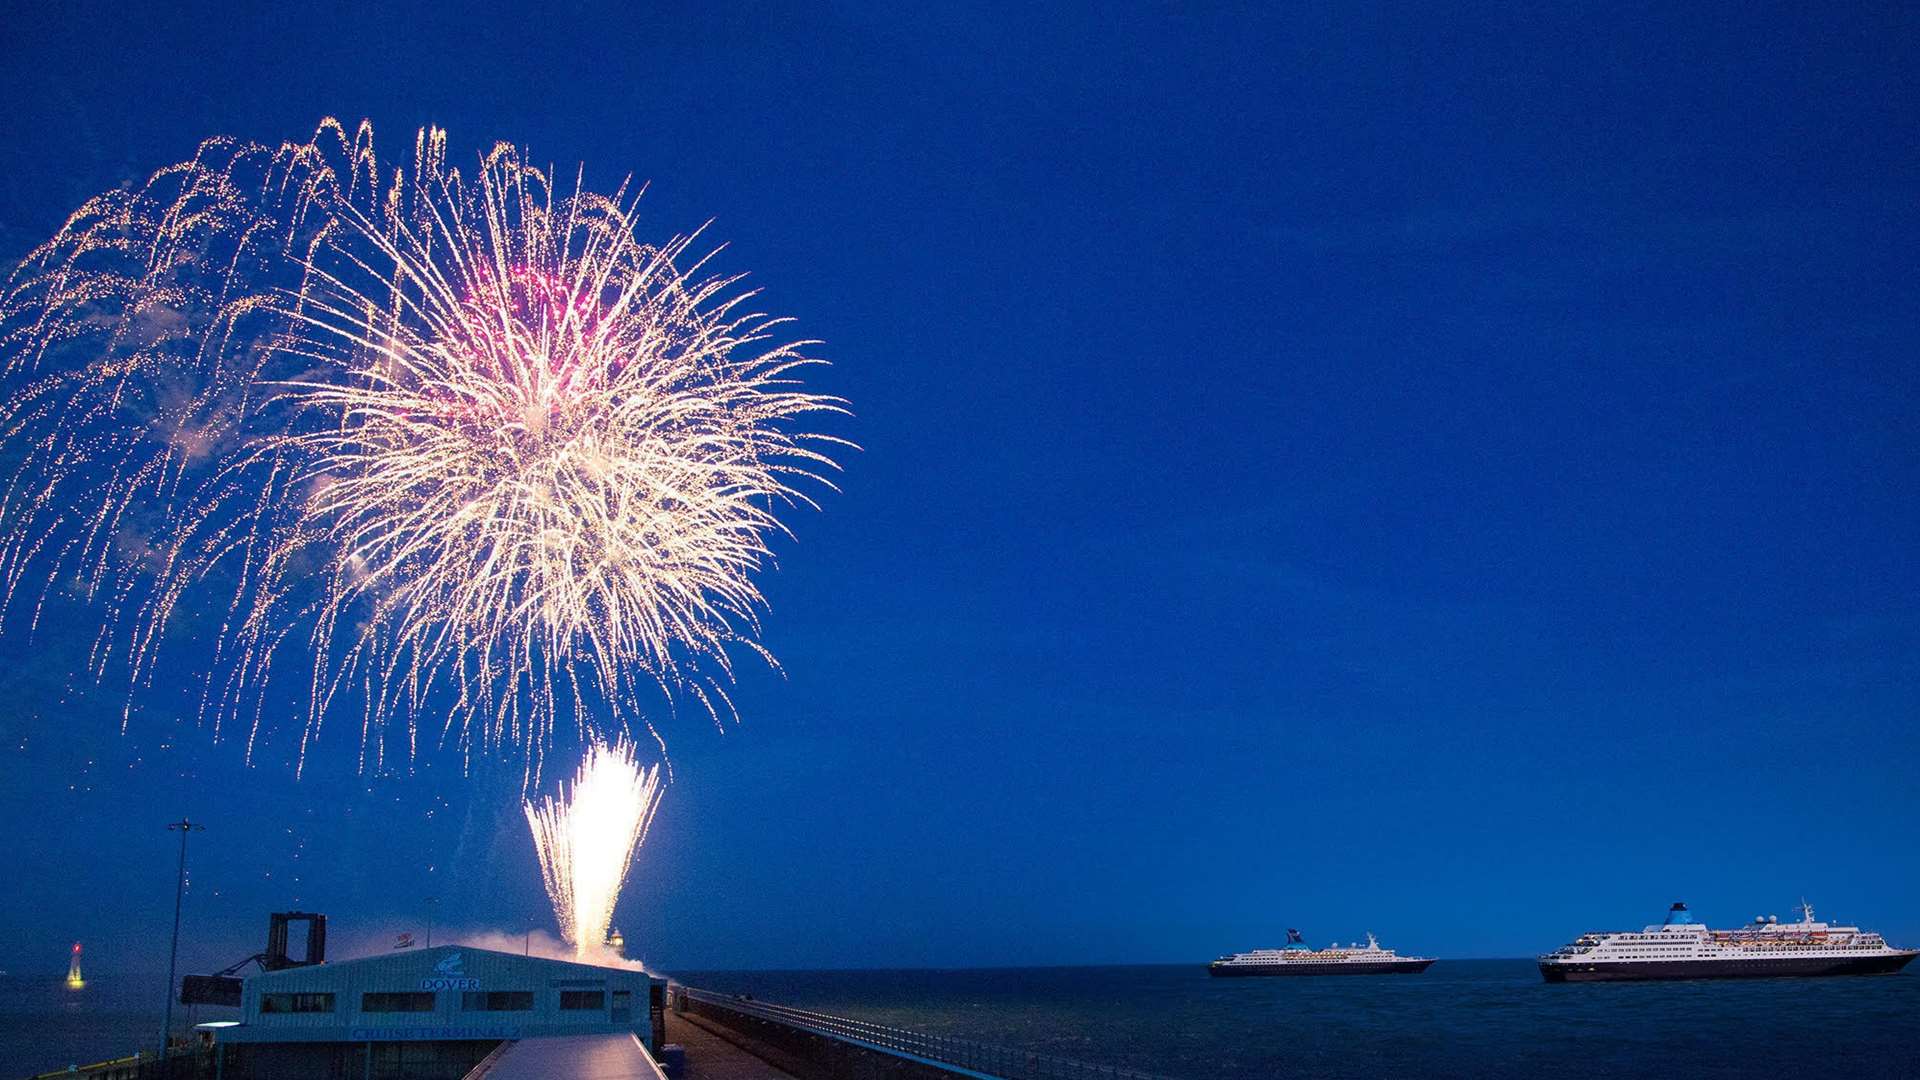 The fireworks set off as the two Saga cruisers sail out of Dover. Image courtesy of Saga Cruises.